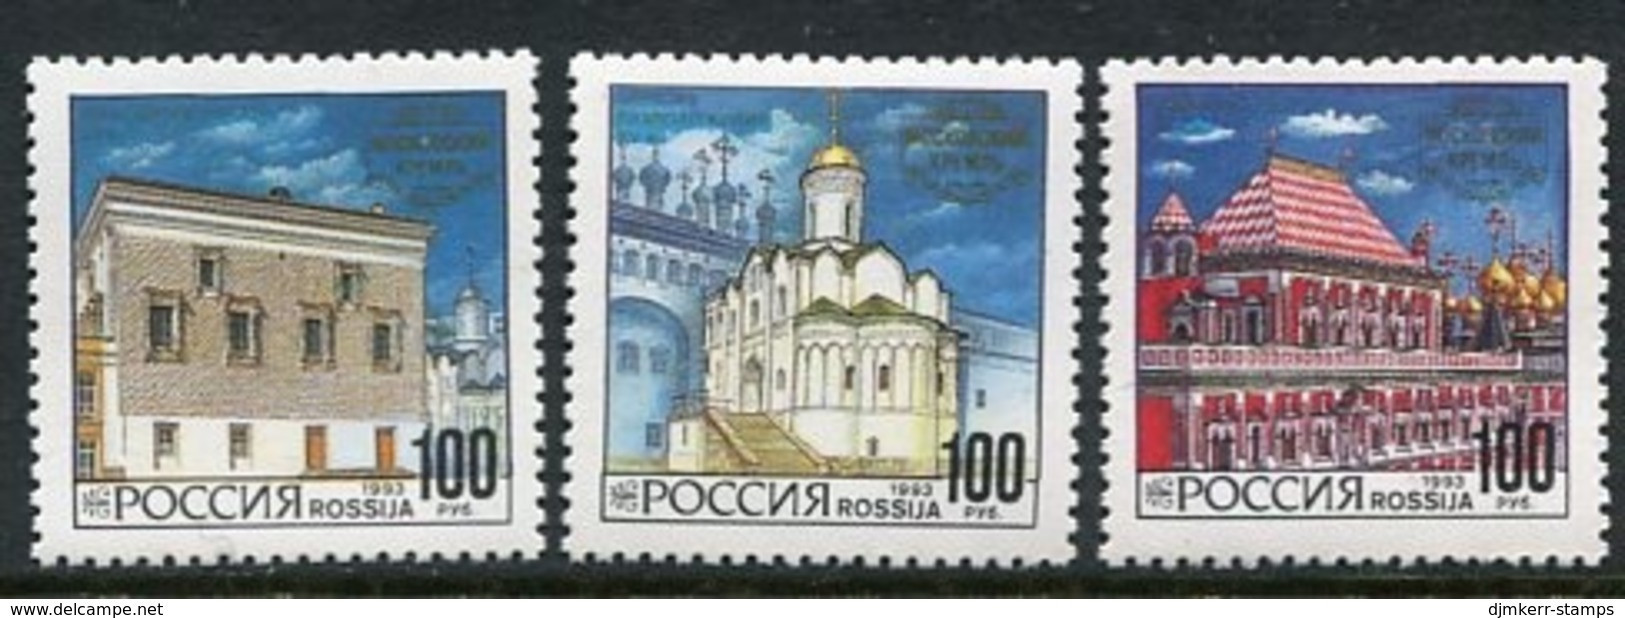 RUSSIA 1993 Moscow Kremlin Buildings MNH / **. .  Michel 340-42 - Unused Stamps